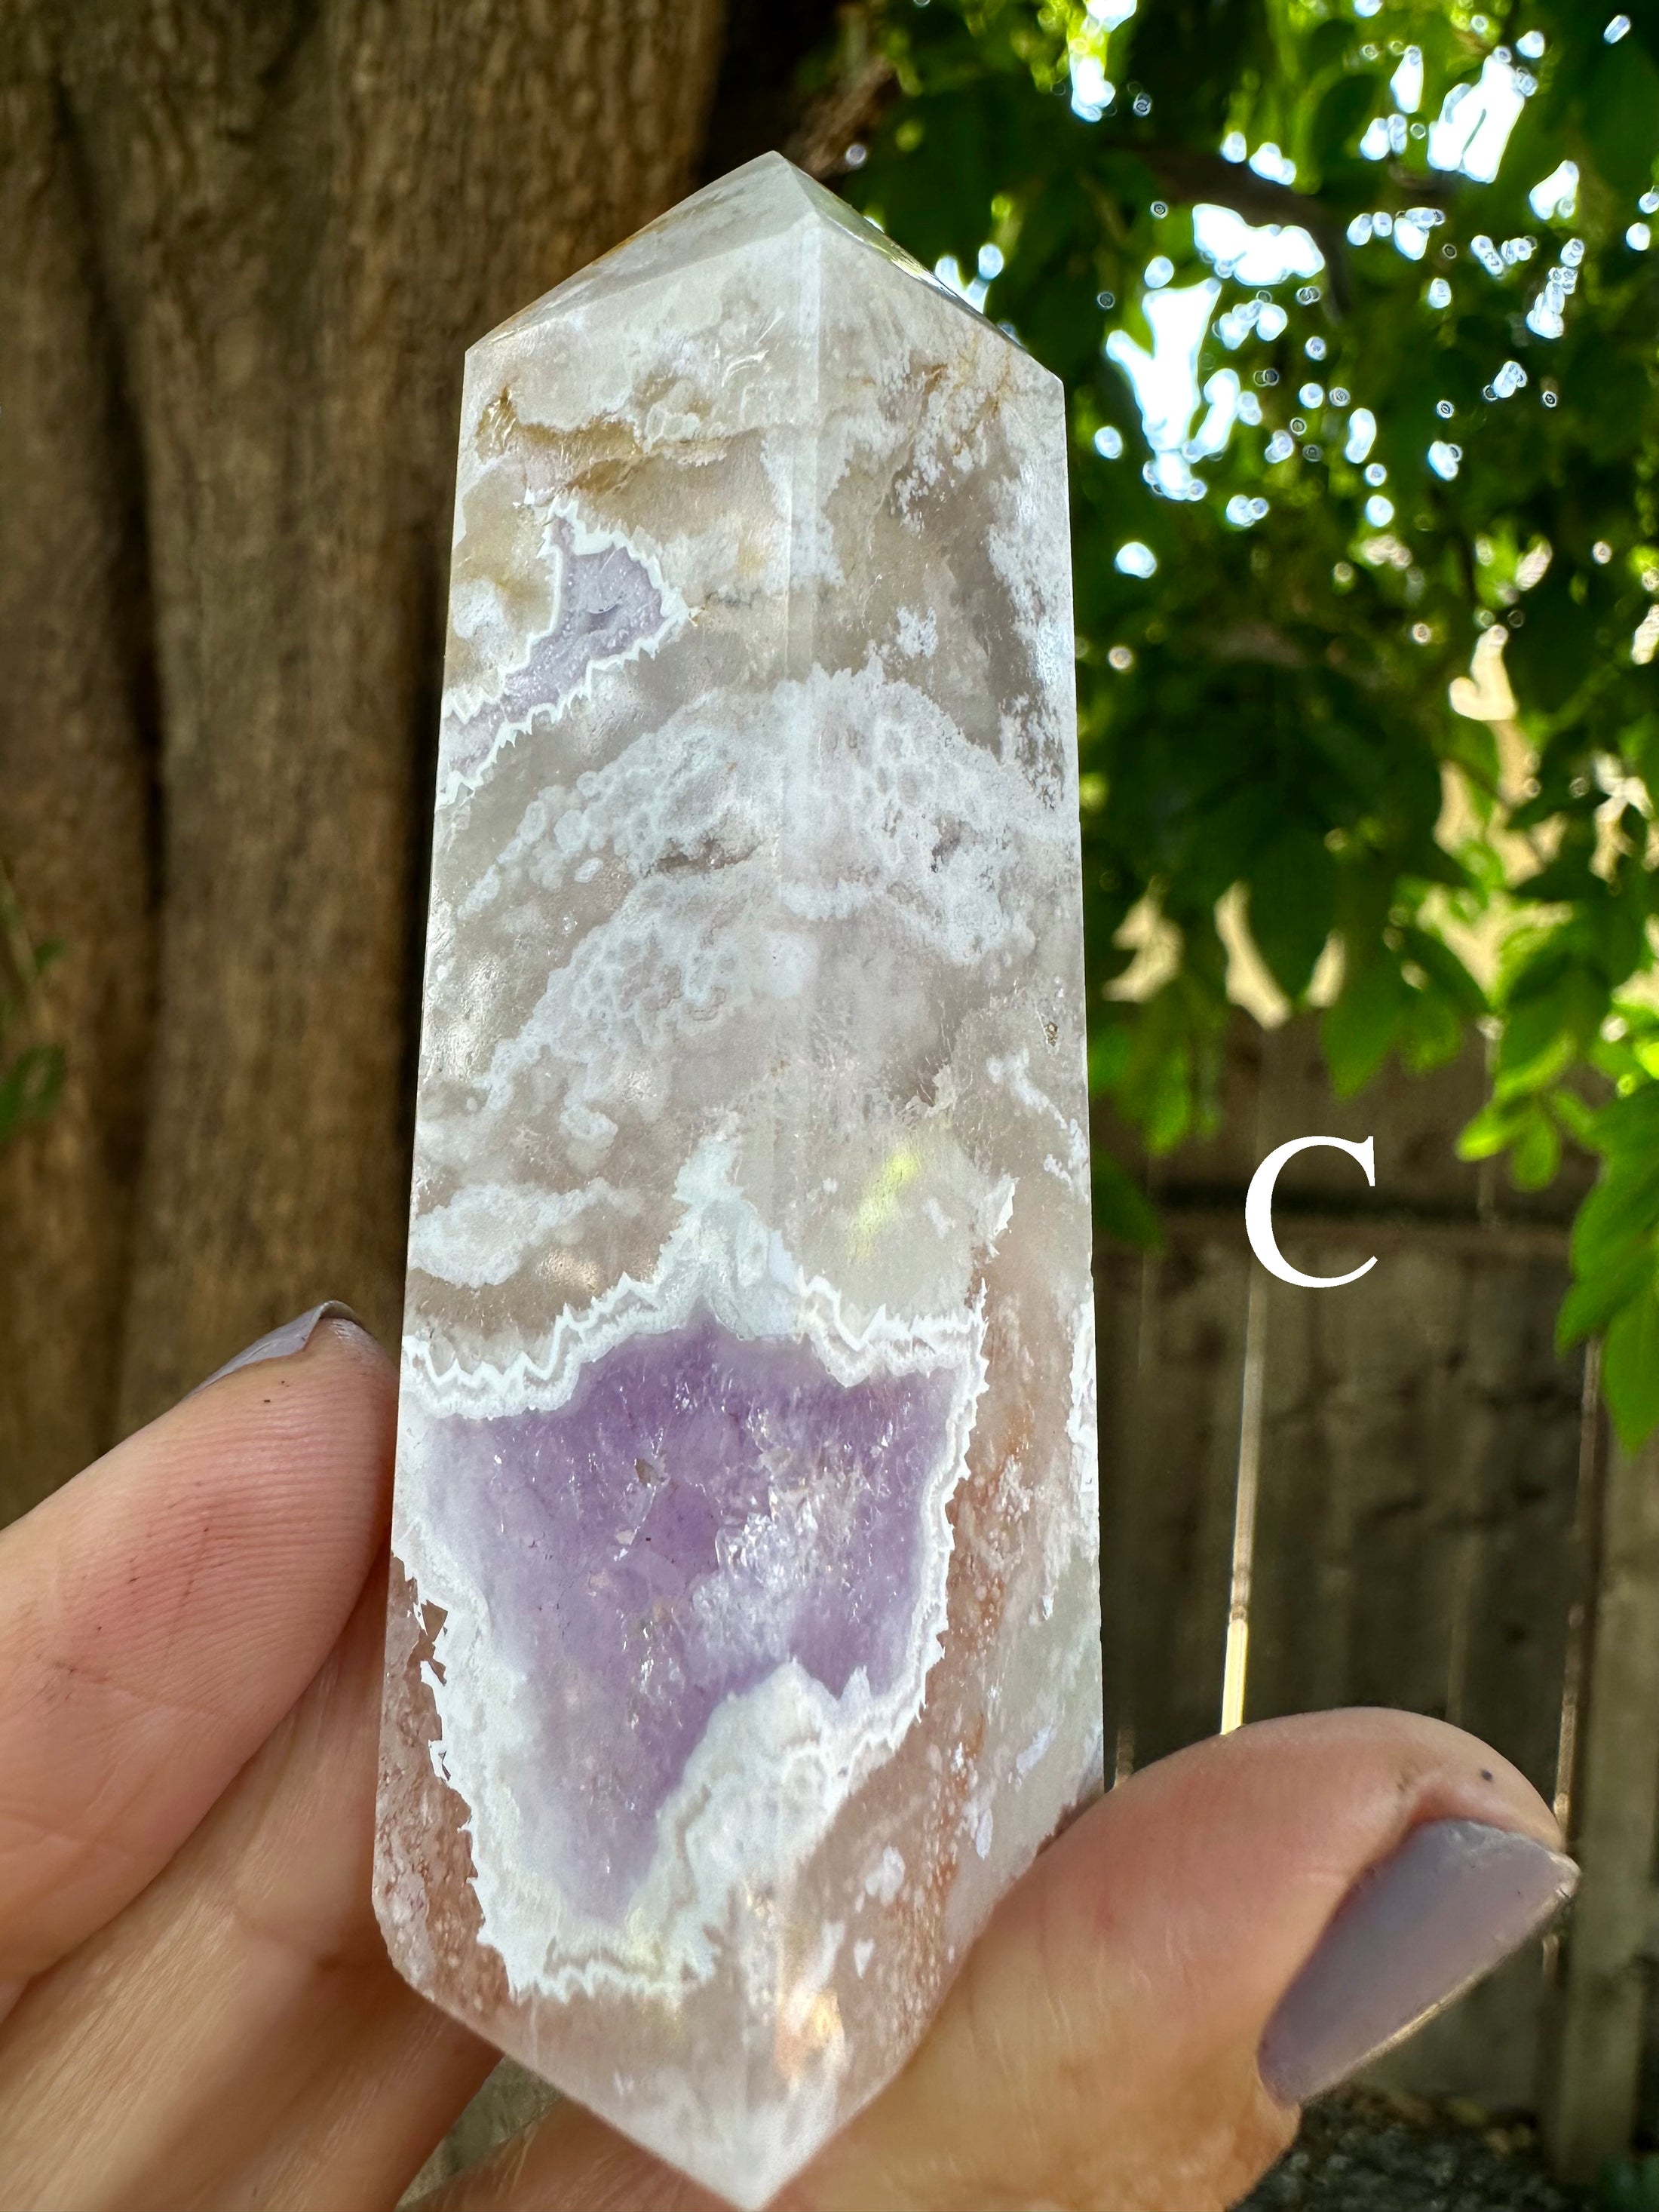 Amazing White Plum Agate Towers with Amethyst Druzy Pockets